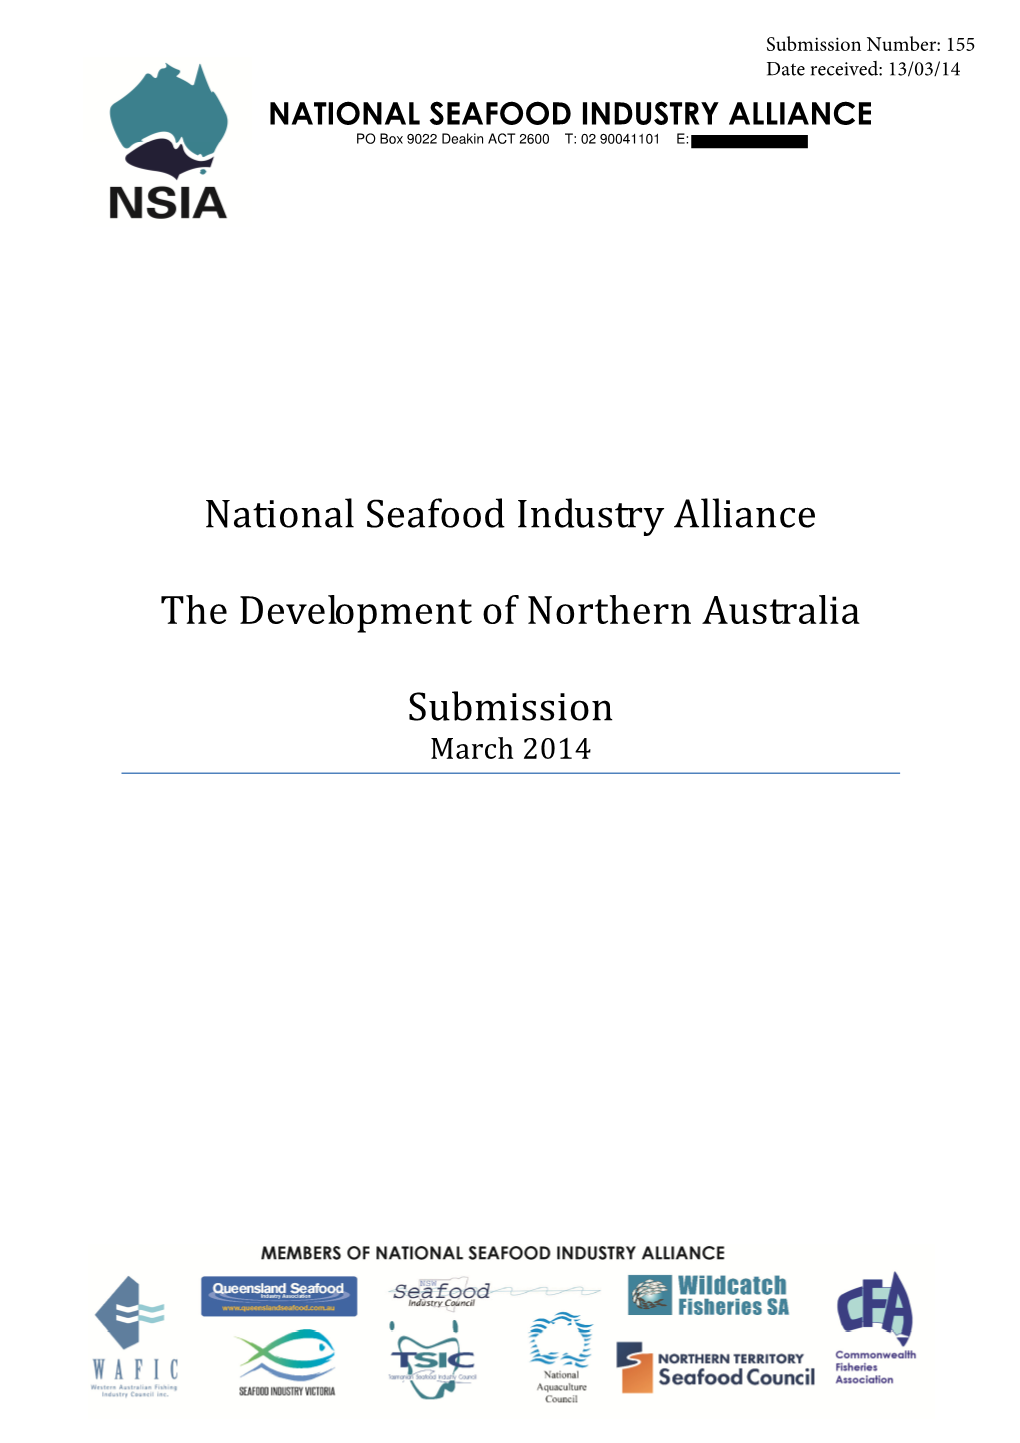 National Seafood Industry Alliance the Development of Northern